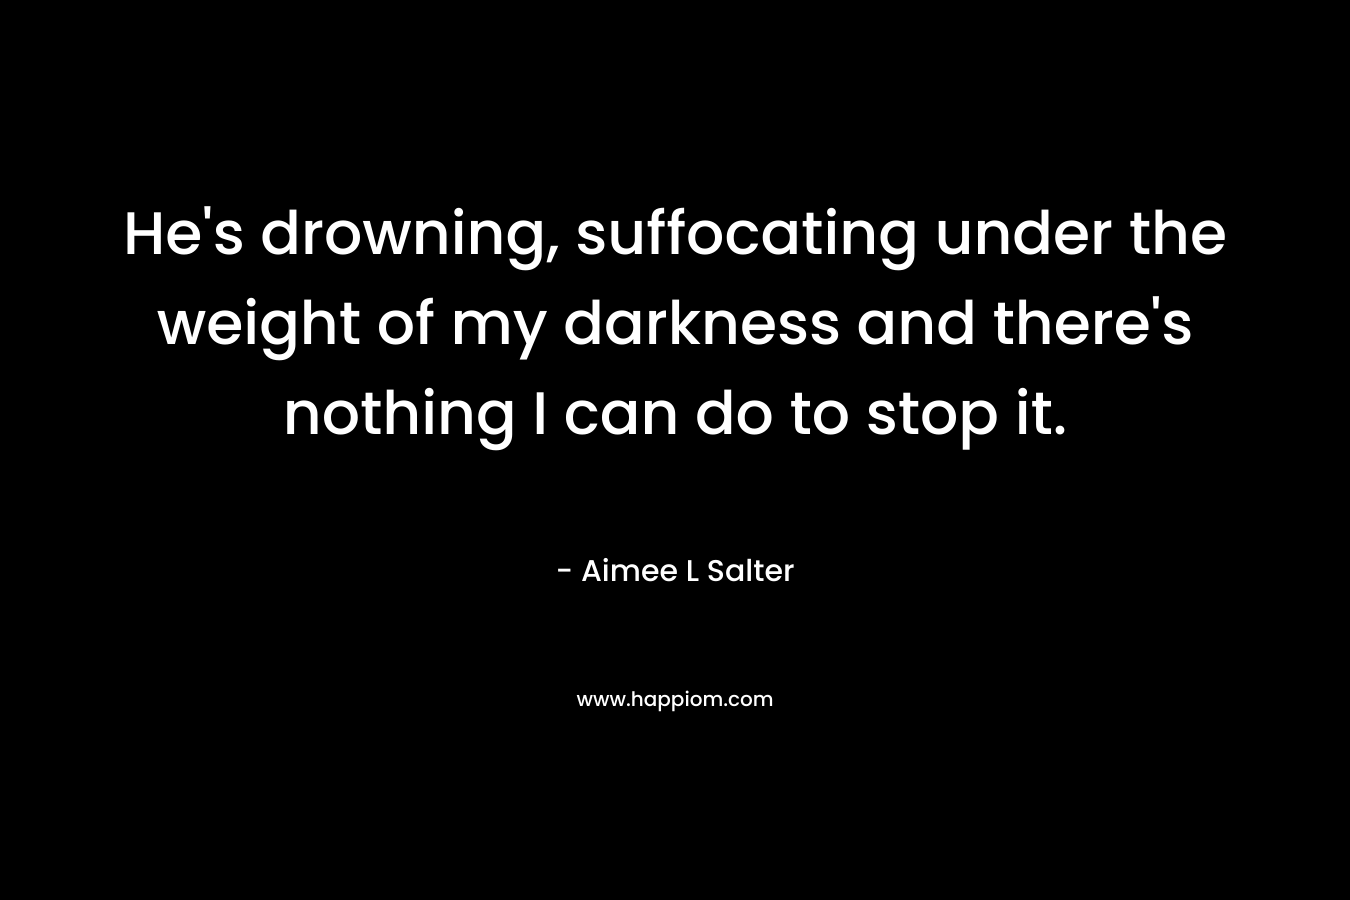 He’s drowning, suffocating under the weight of my darkness and there’s nothing I can do to stop it. – Aimee L Salter